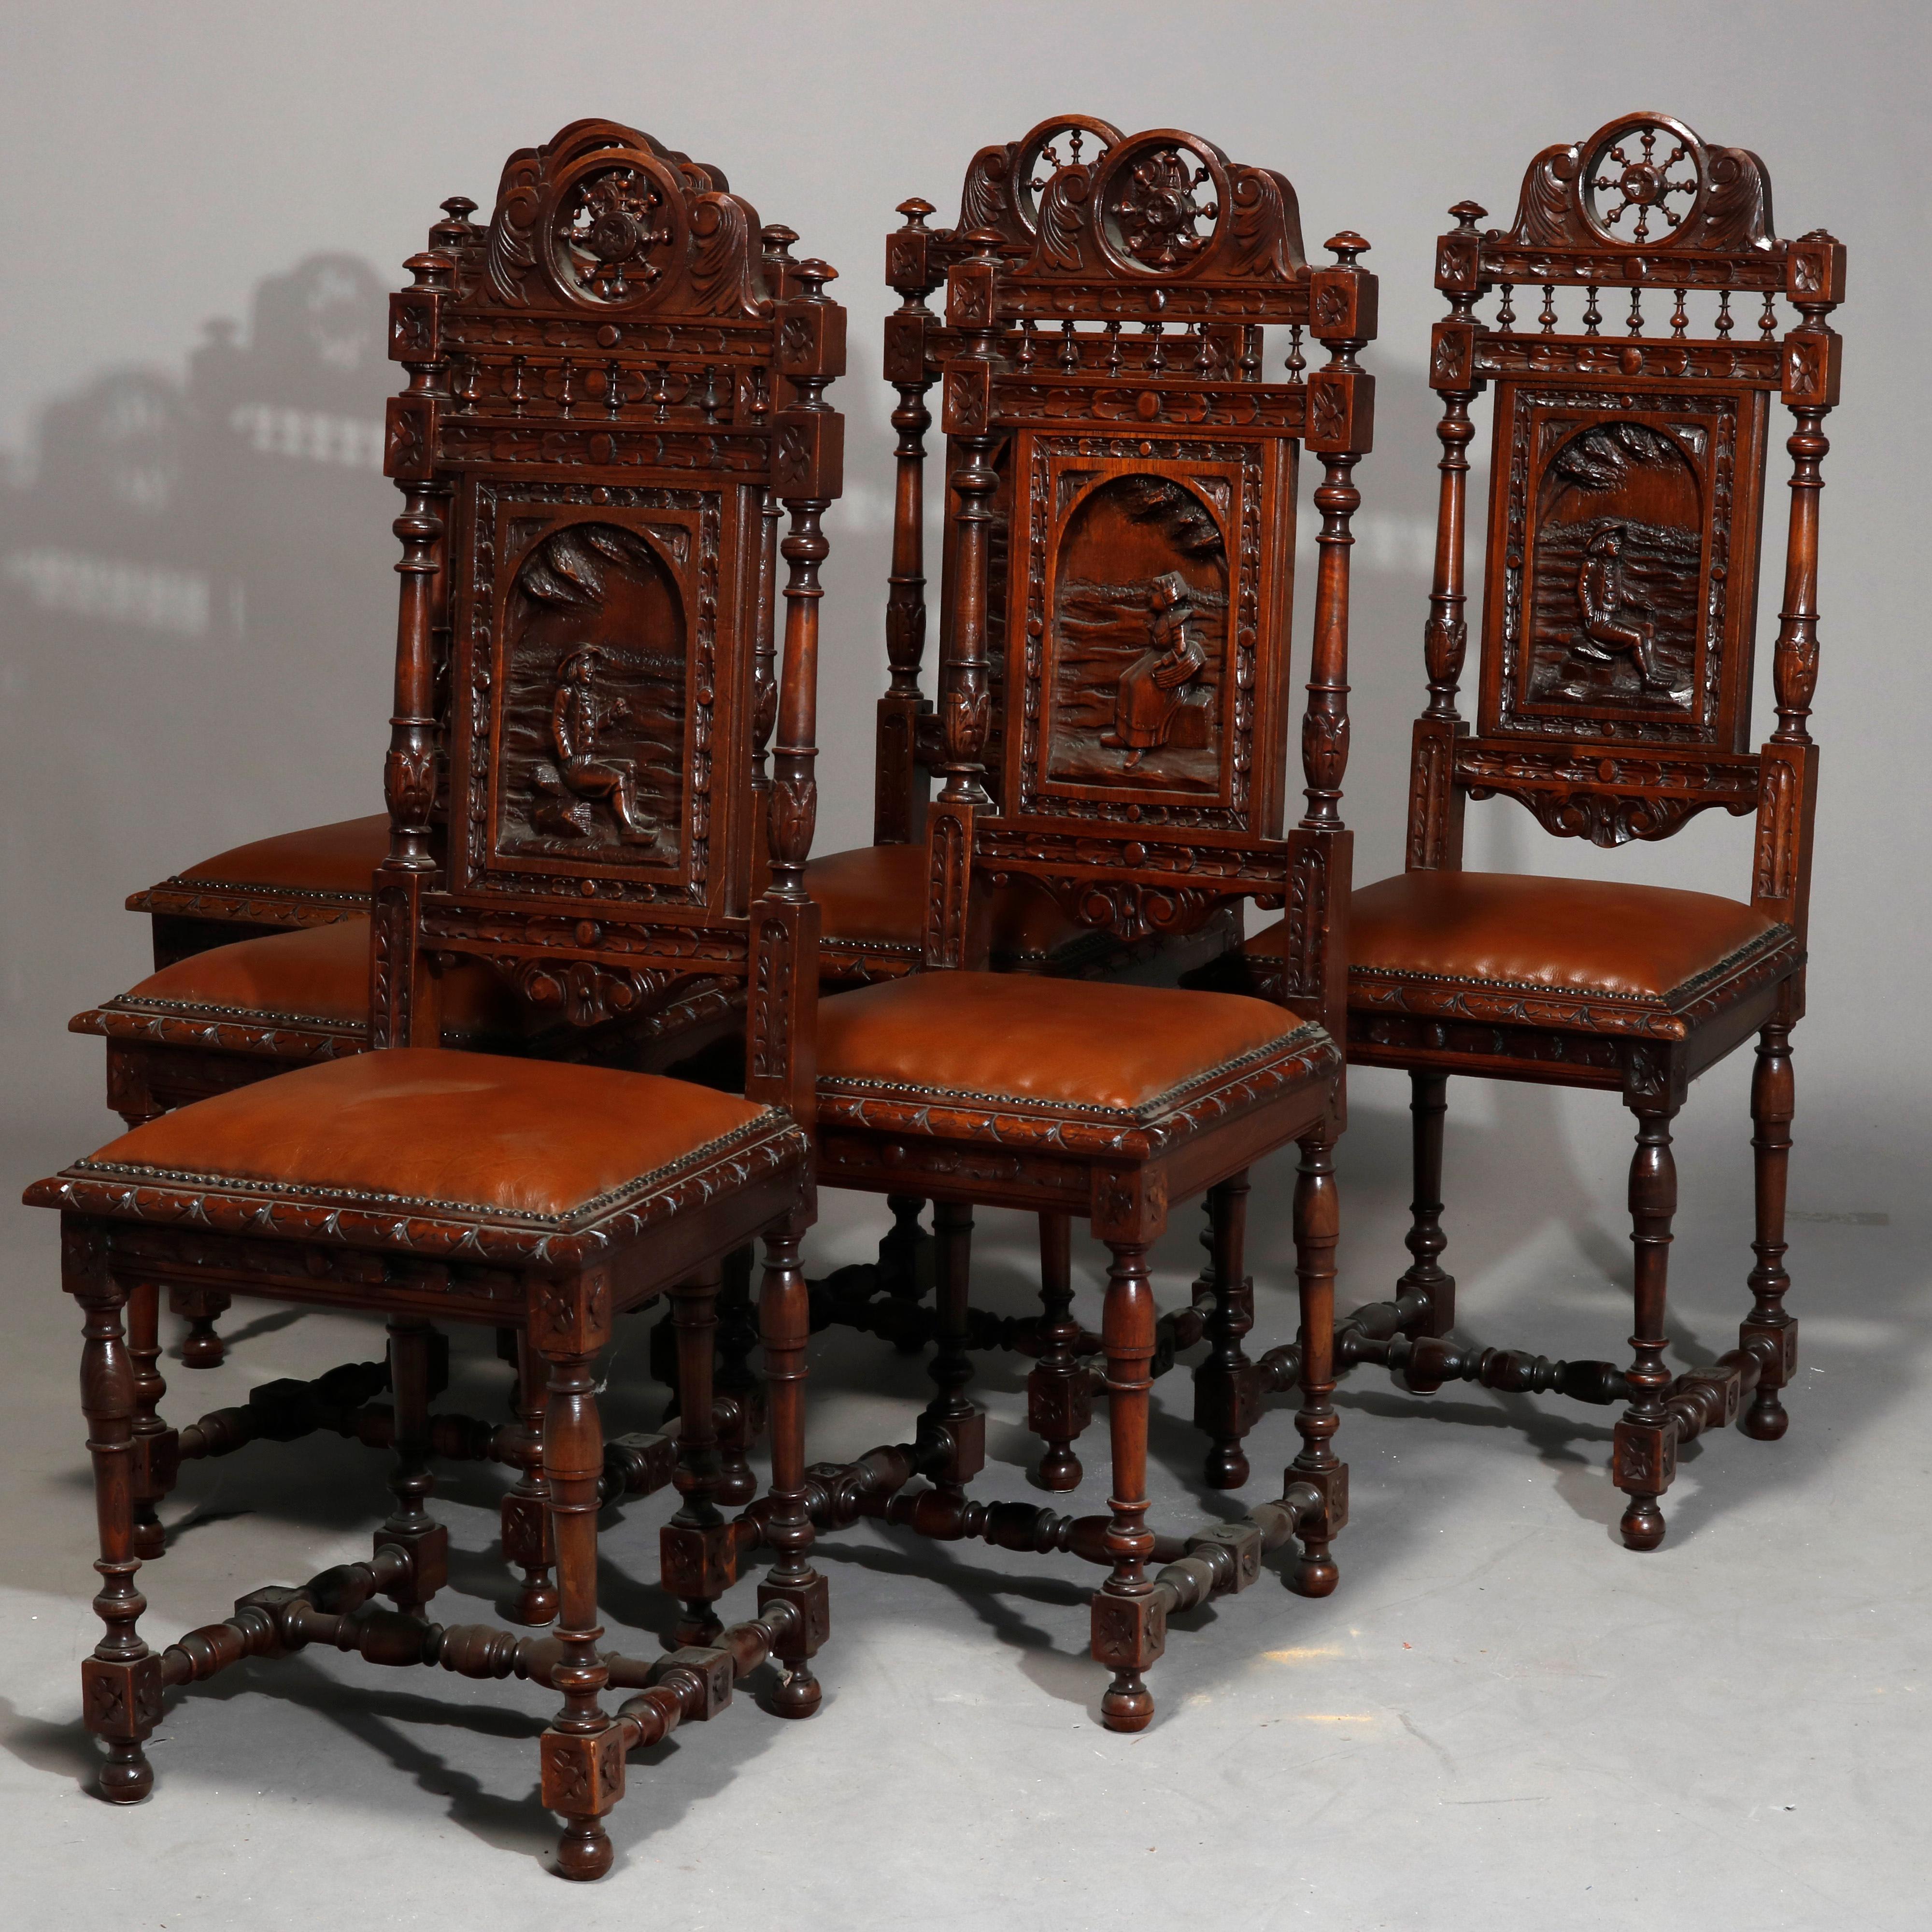 An antique set of six continental dining chairs offers oak construction with wagon wheel form crest surmounting spindled and deeply carved backs with arch reserve having genre scenes with figures and countryside elements over leather seats, raised